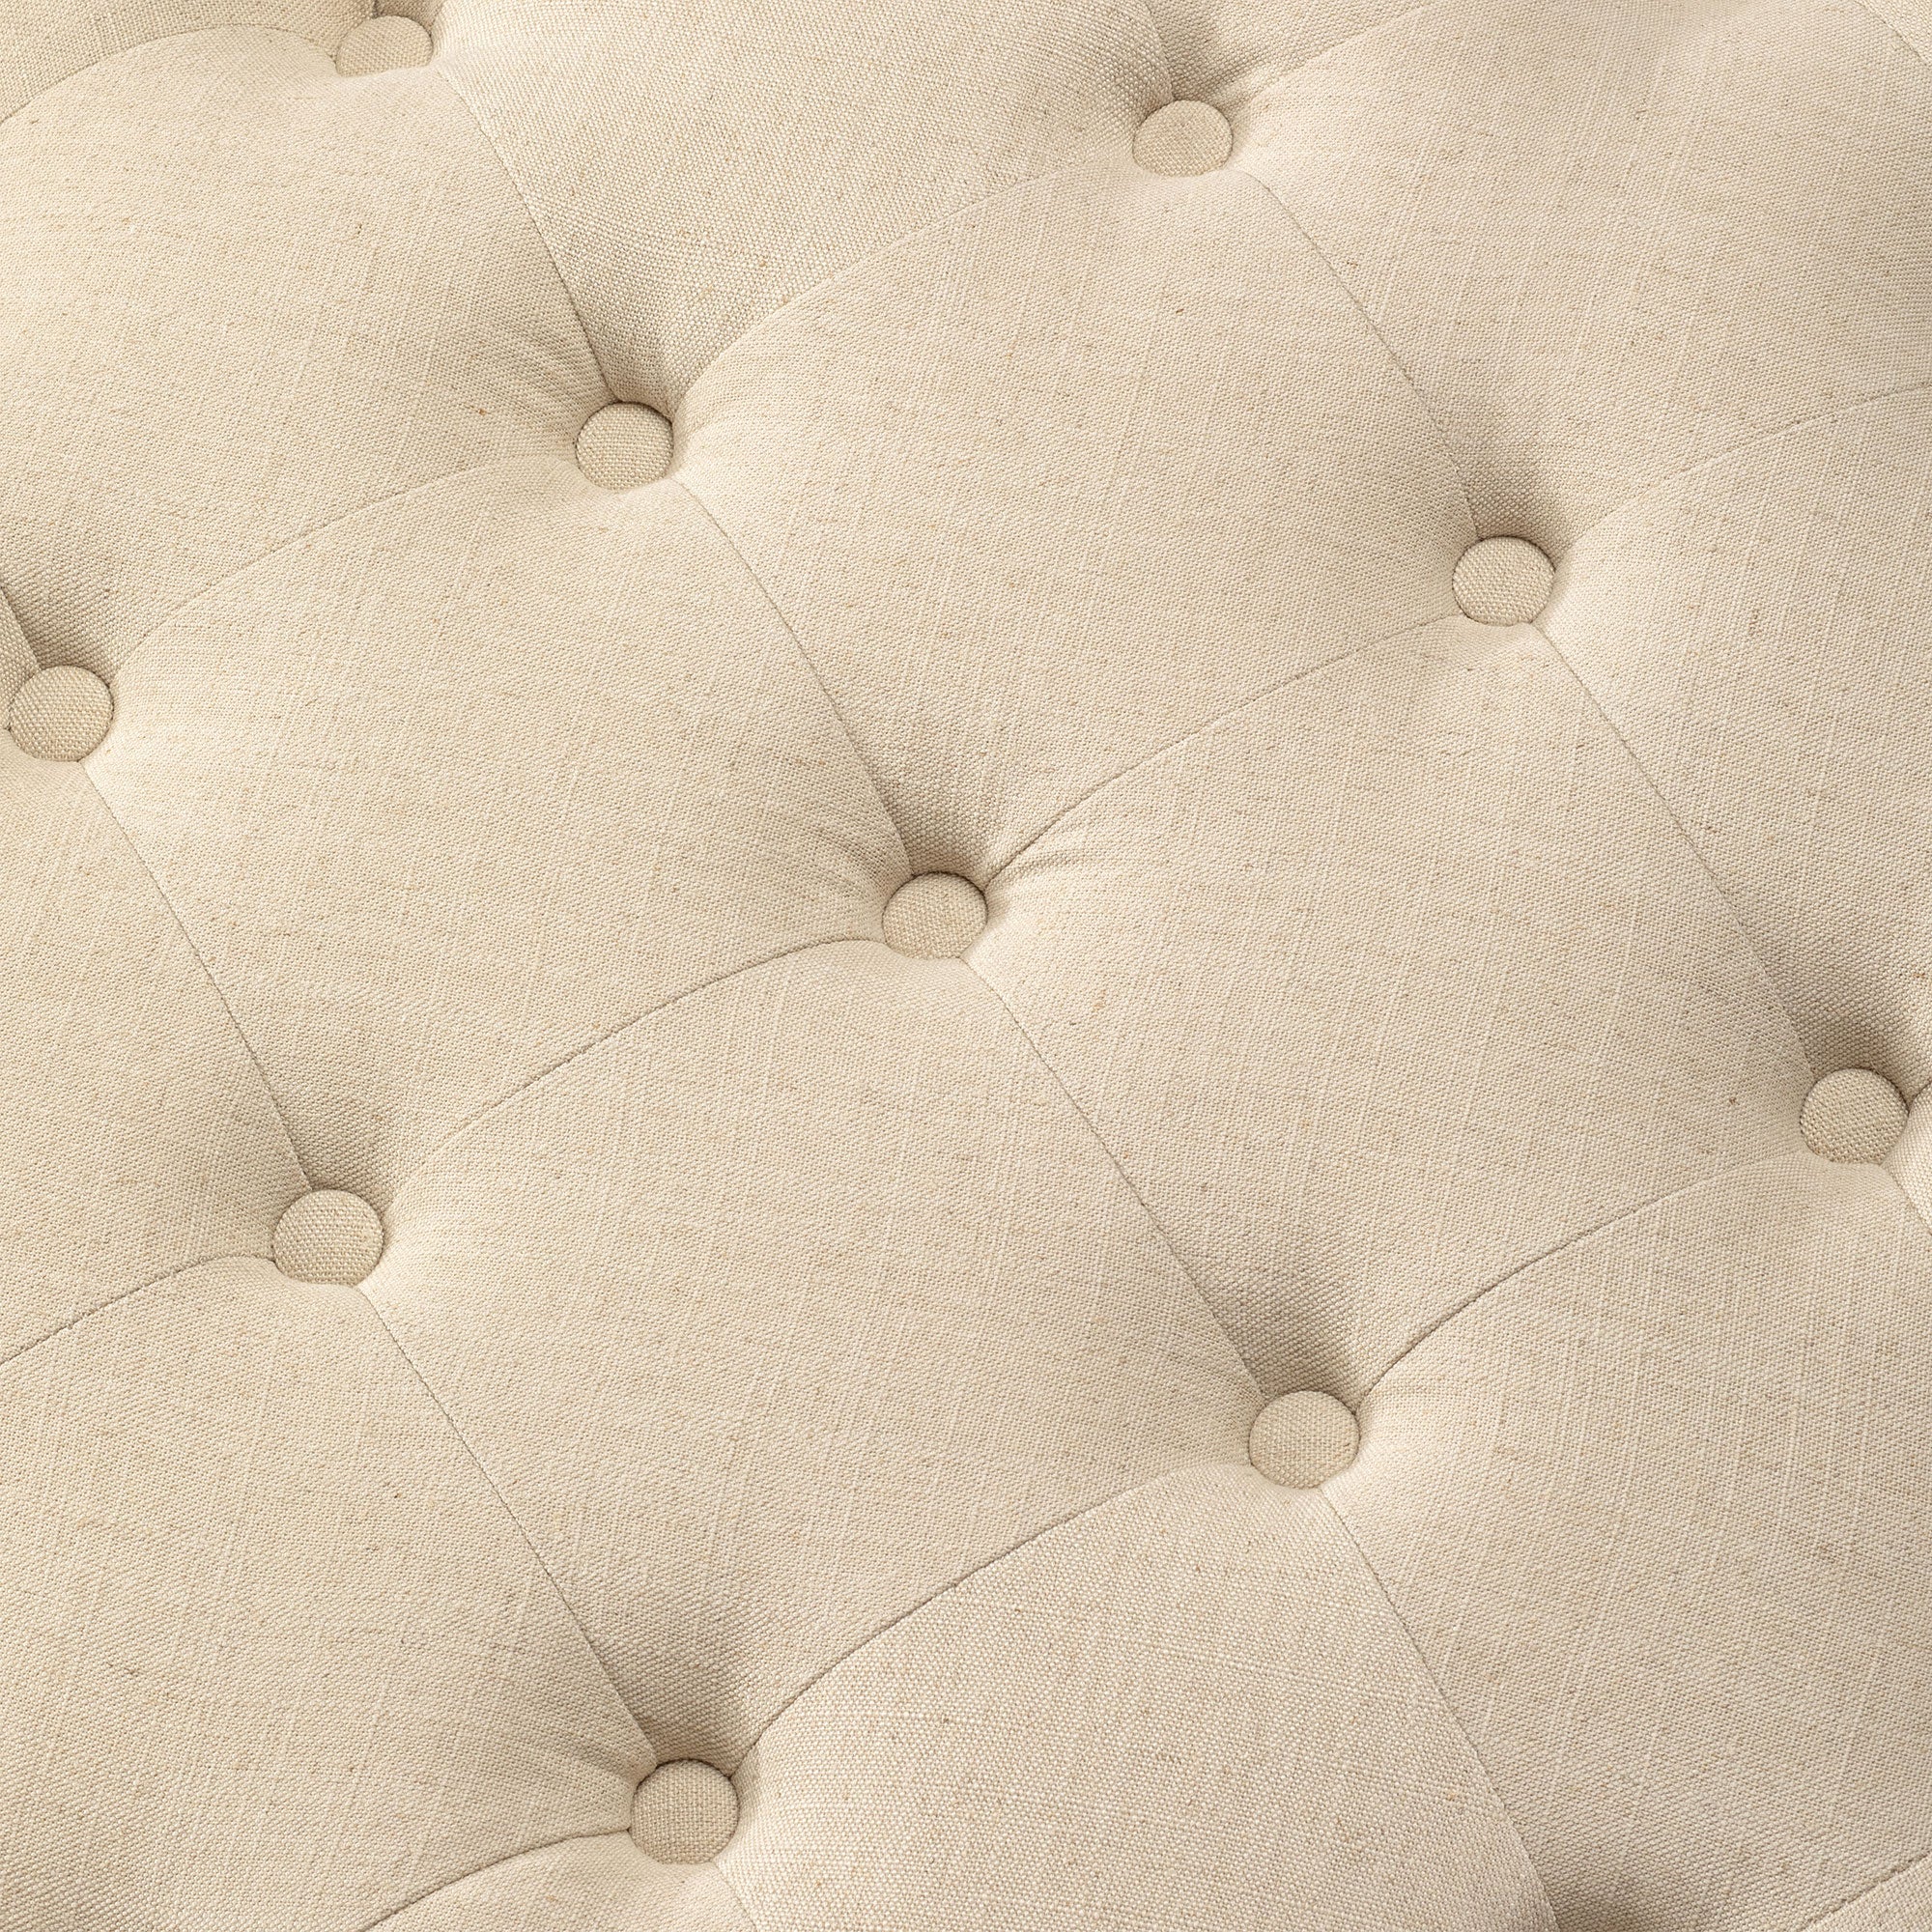 Marcy Classical Round Ottoman in Taupe Fabric Upholstery in Ottomans & Benches by Maven Lane